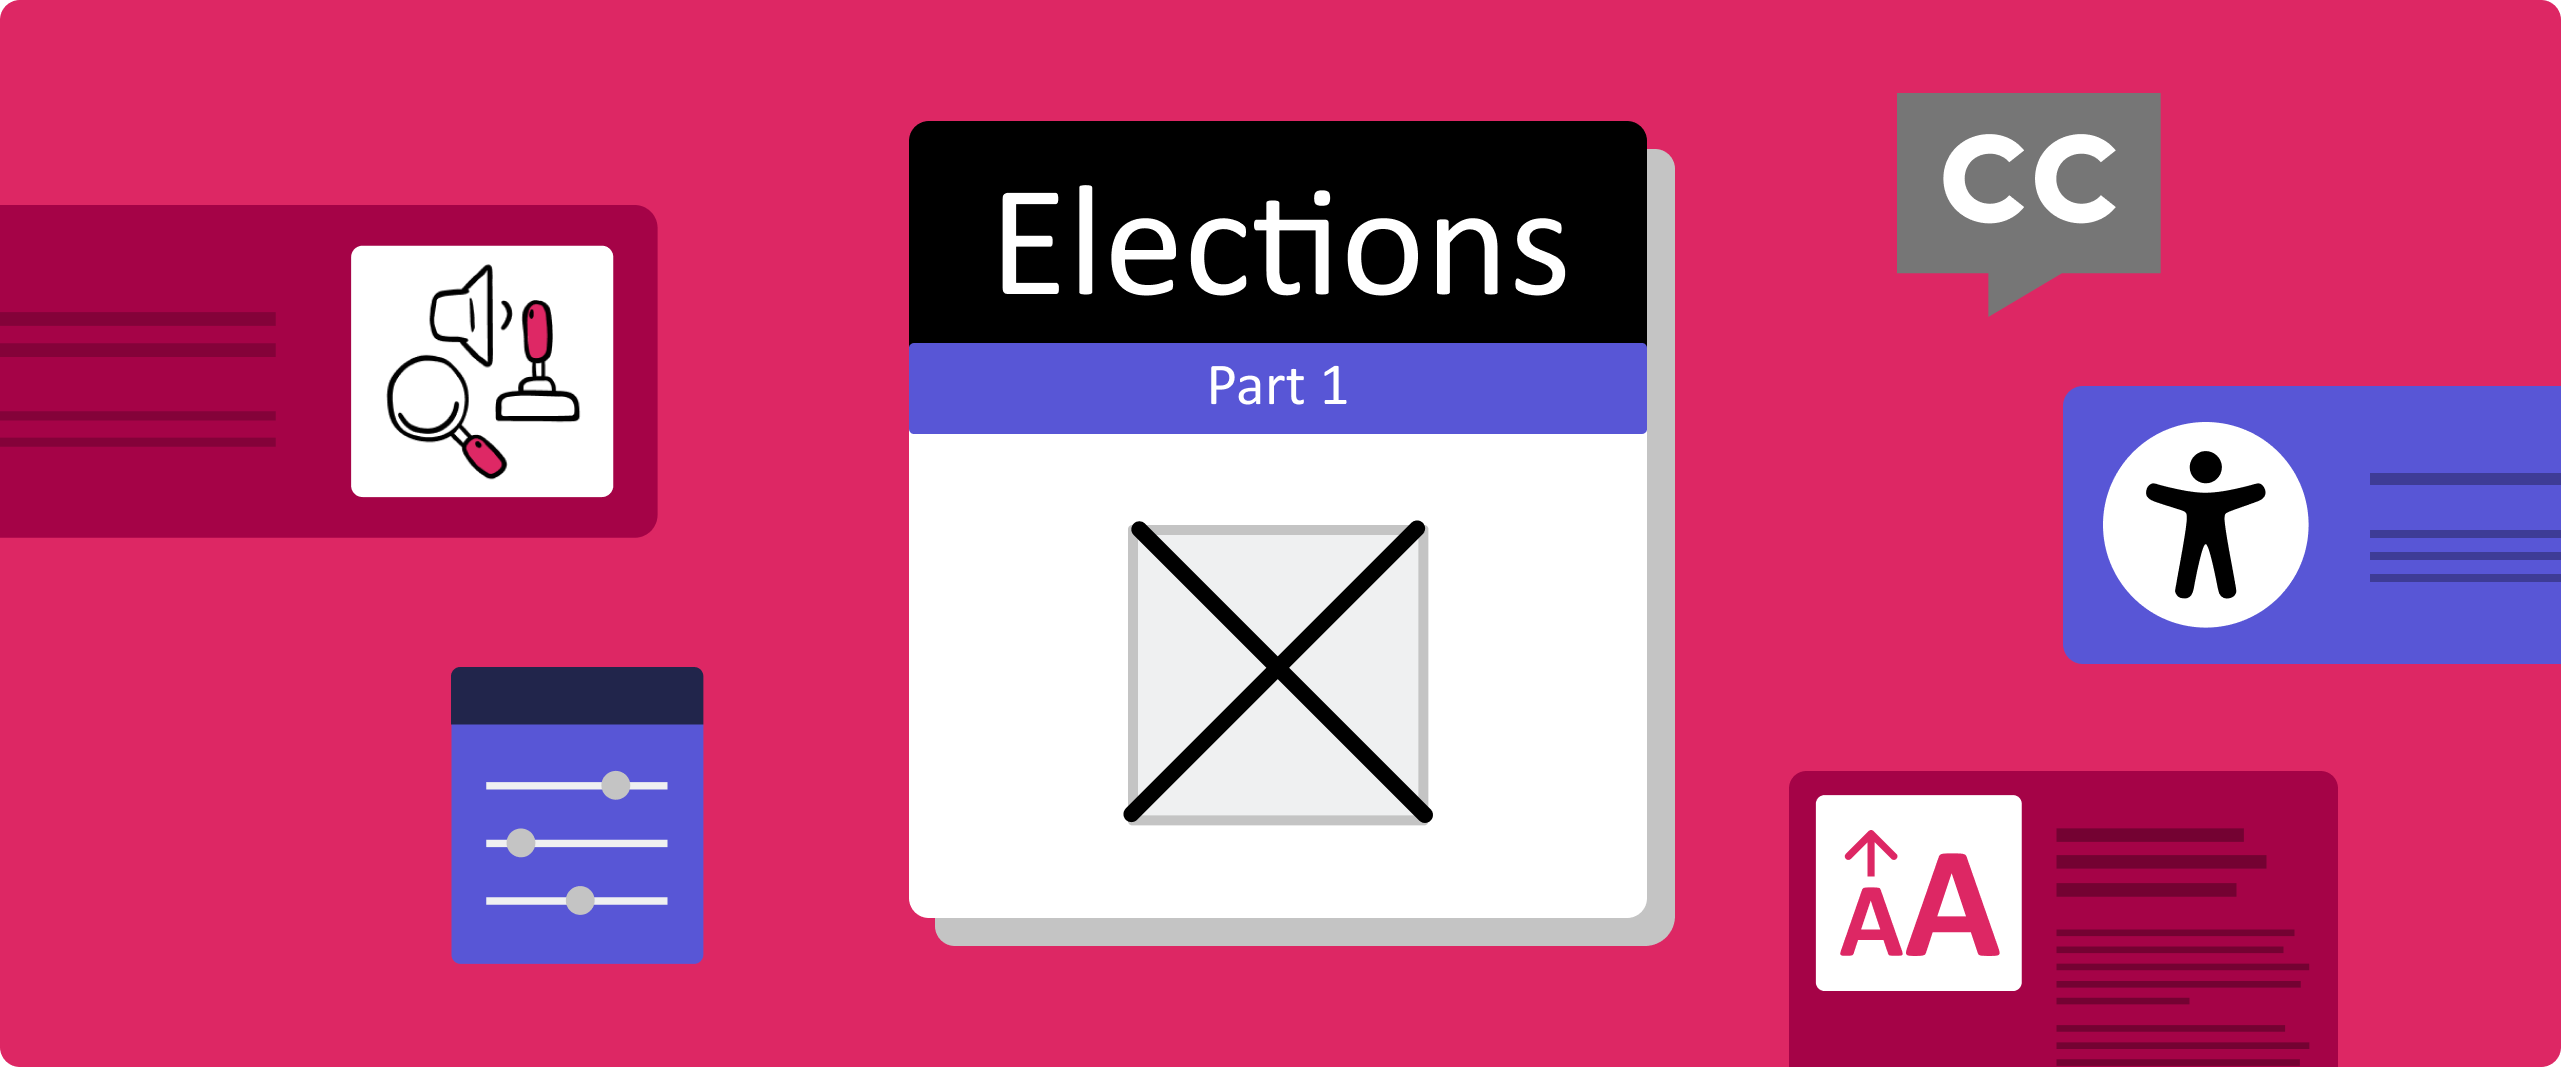 Decorative banner image that says 'Elections Part 1' with illustrations of a checked off ballot checkbox, surrounded by smaller illustrations of accessibility features such as a closed captioning symbol, text resizing, and other assistive technologies